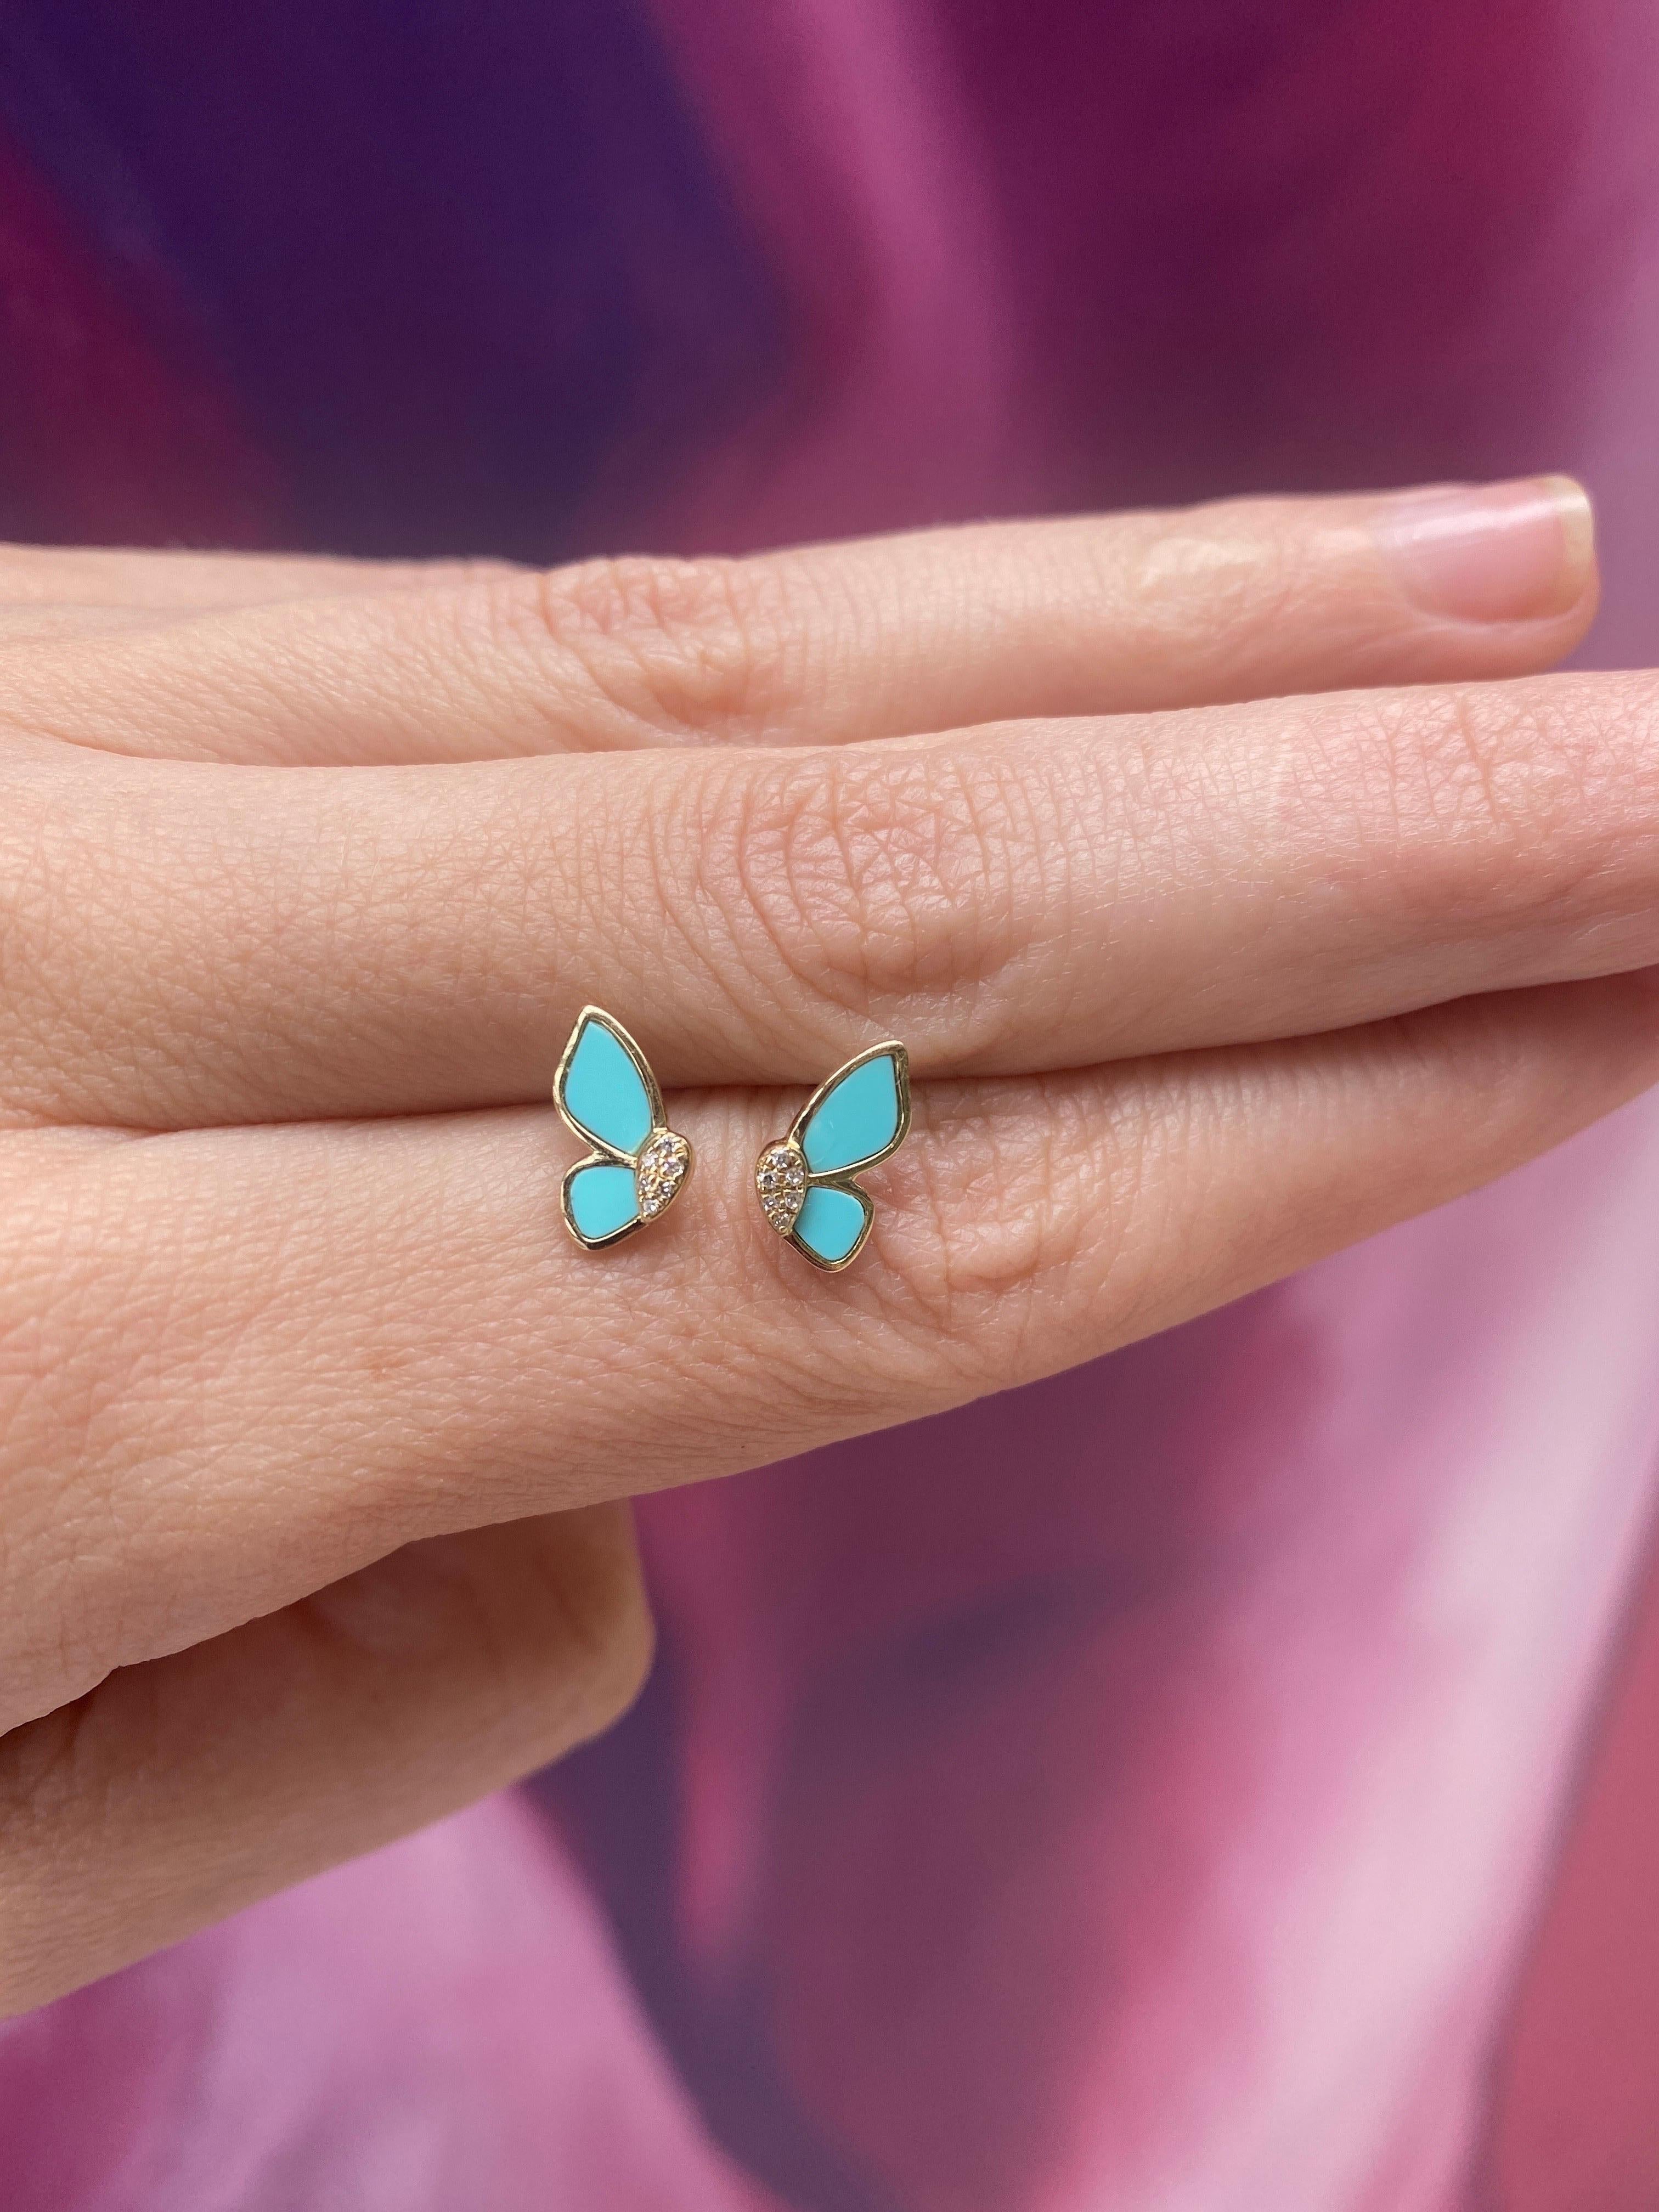 These fun and unique stud earrings feature turquoise enamel and 0.02 carat total weight in round diamonds set in 14 karat yellow gold. Friction post with butterfly back. 
Measurements: Height 11mm